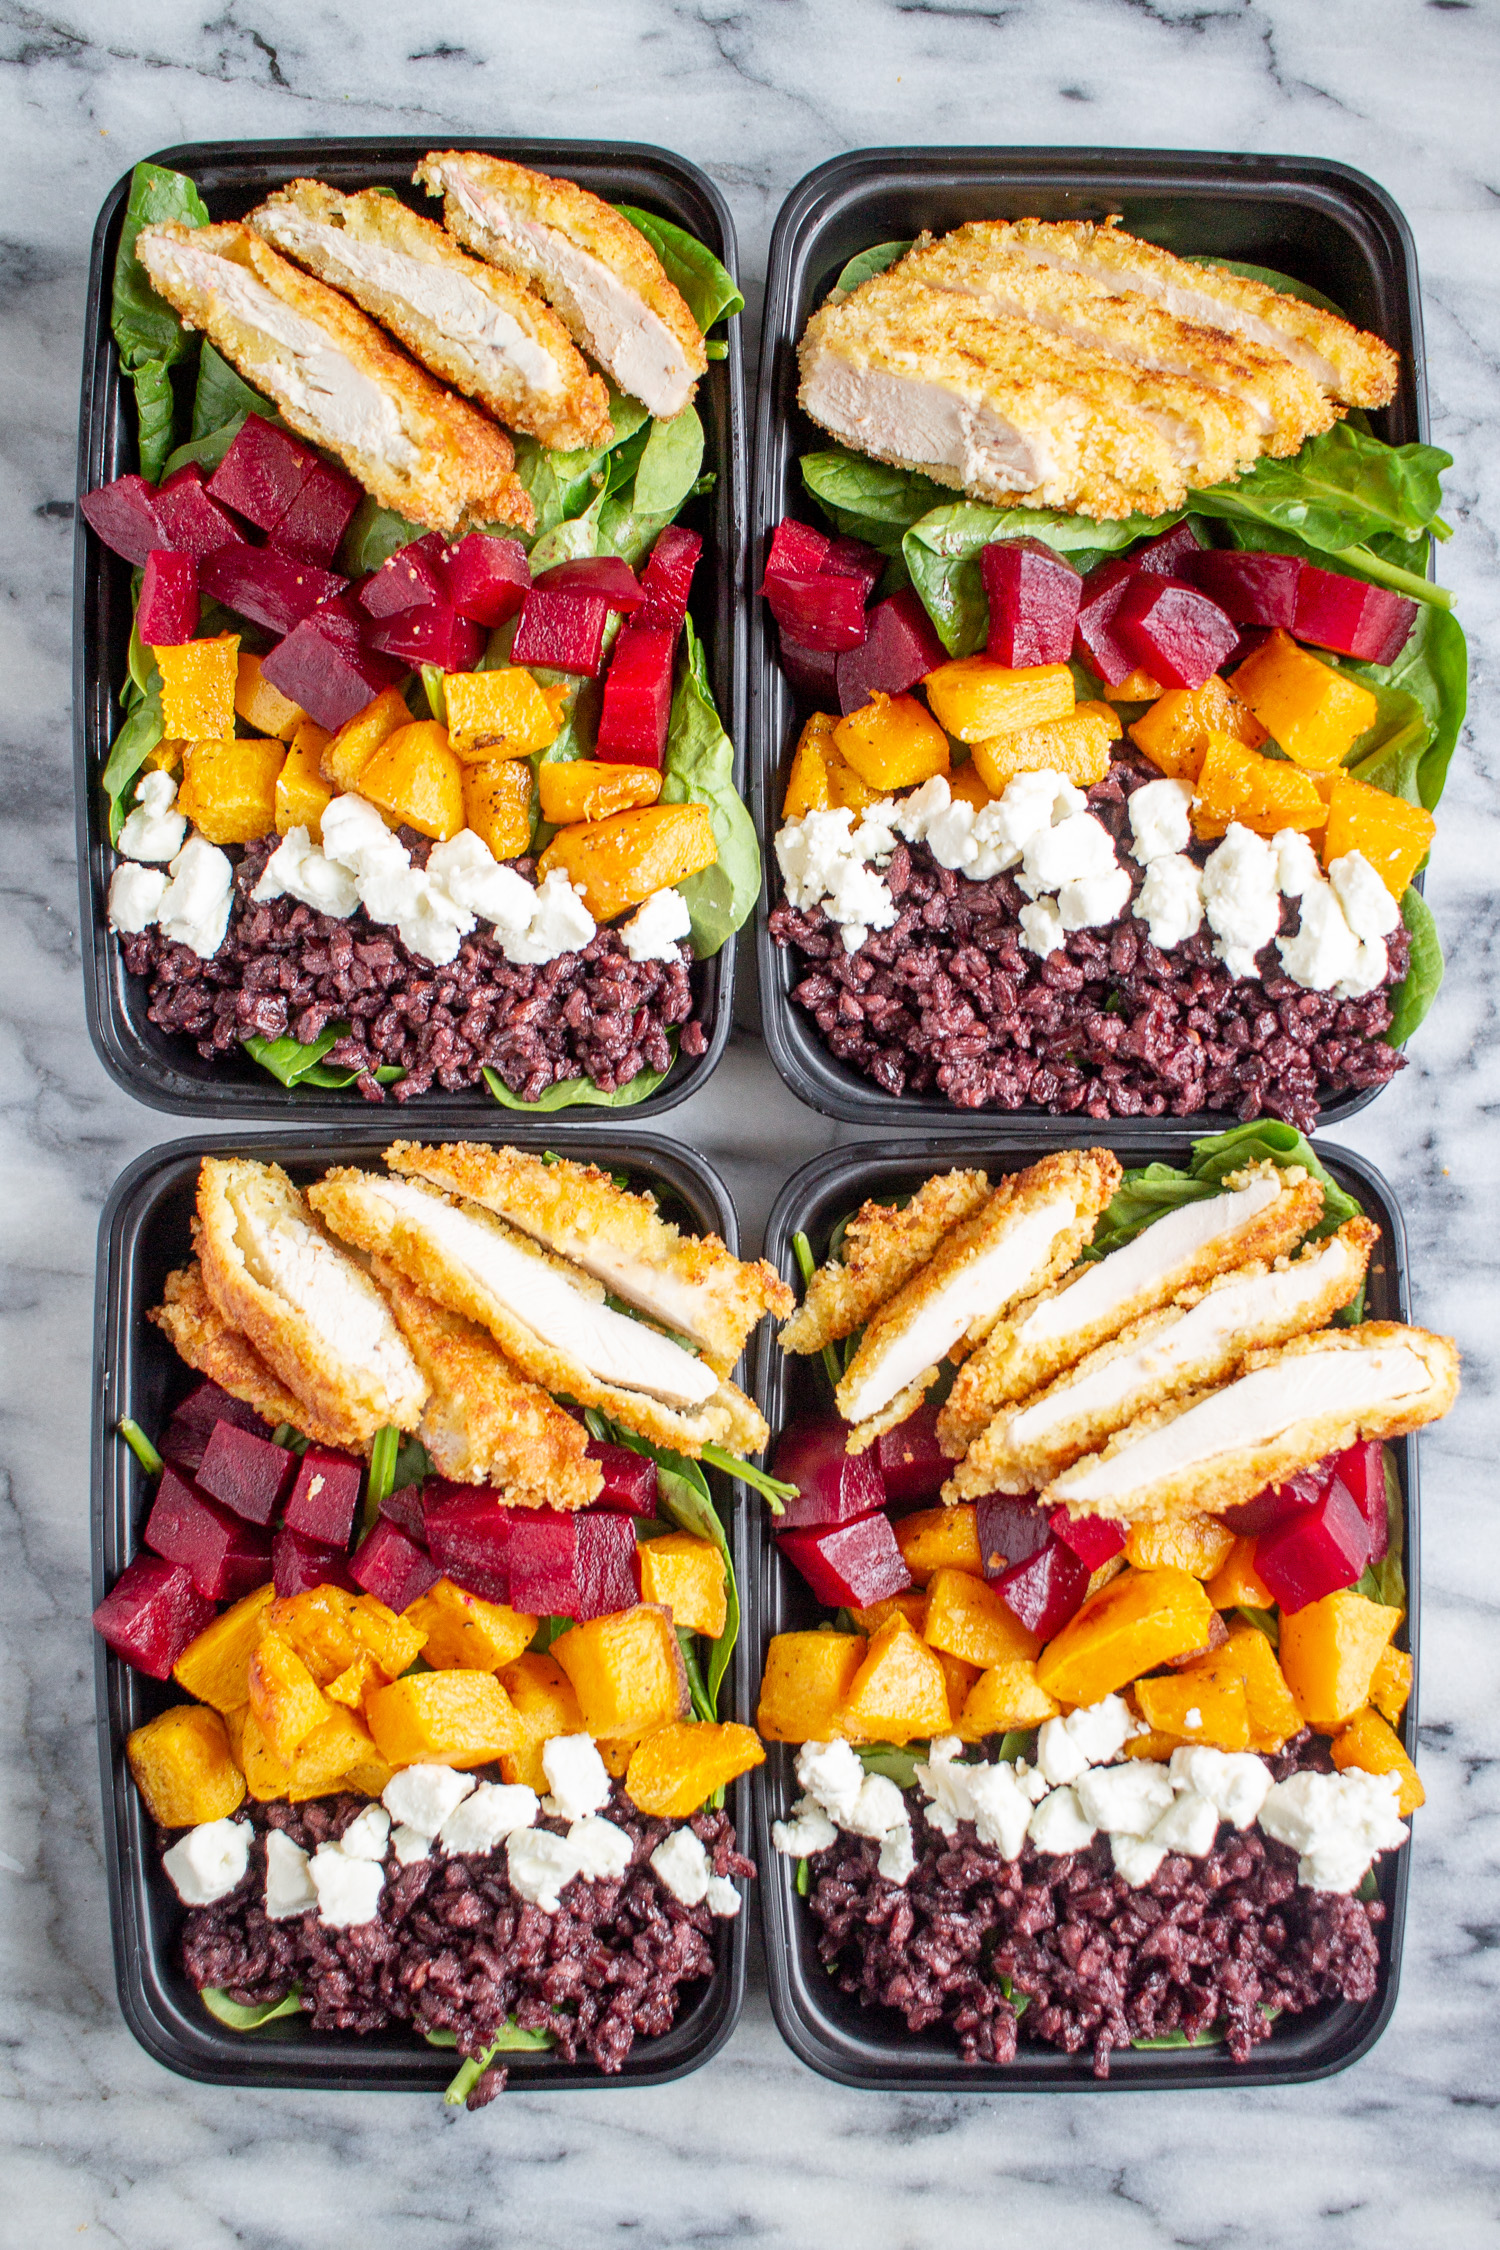 Superfood Salad Bowls with Crispy Chicken - A Healthy Meal Prep Recipe